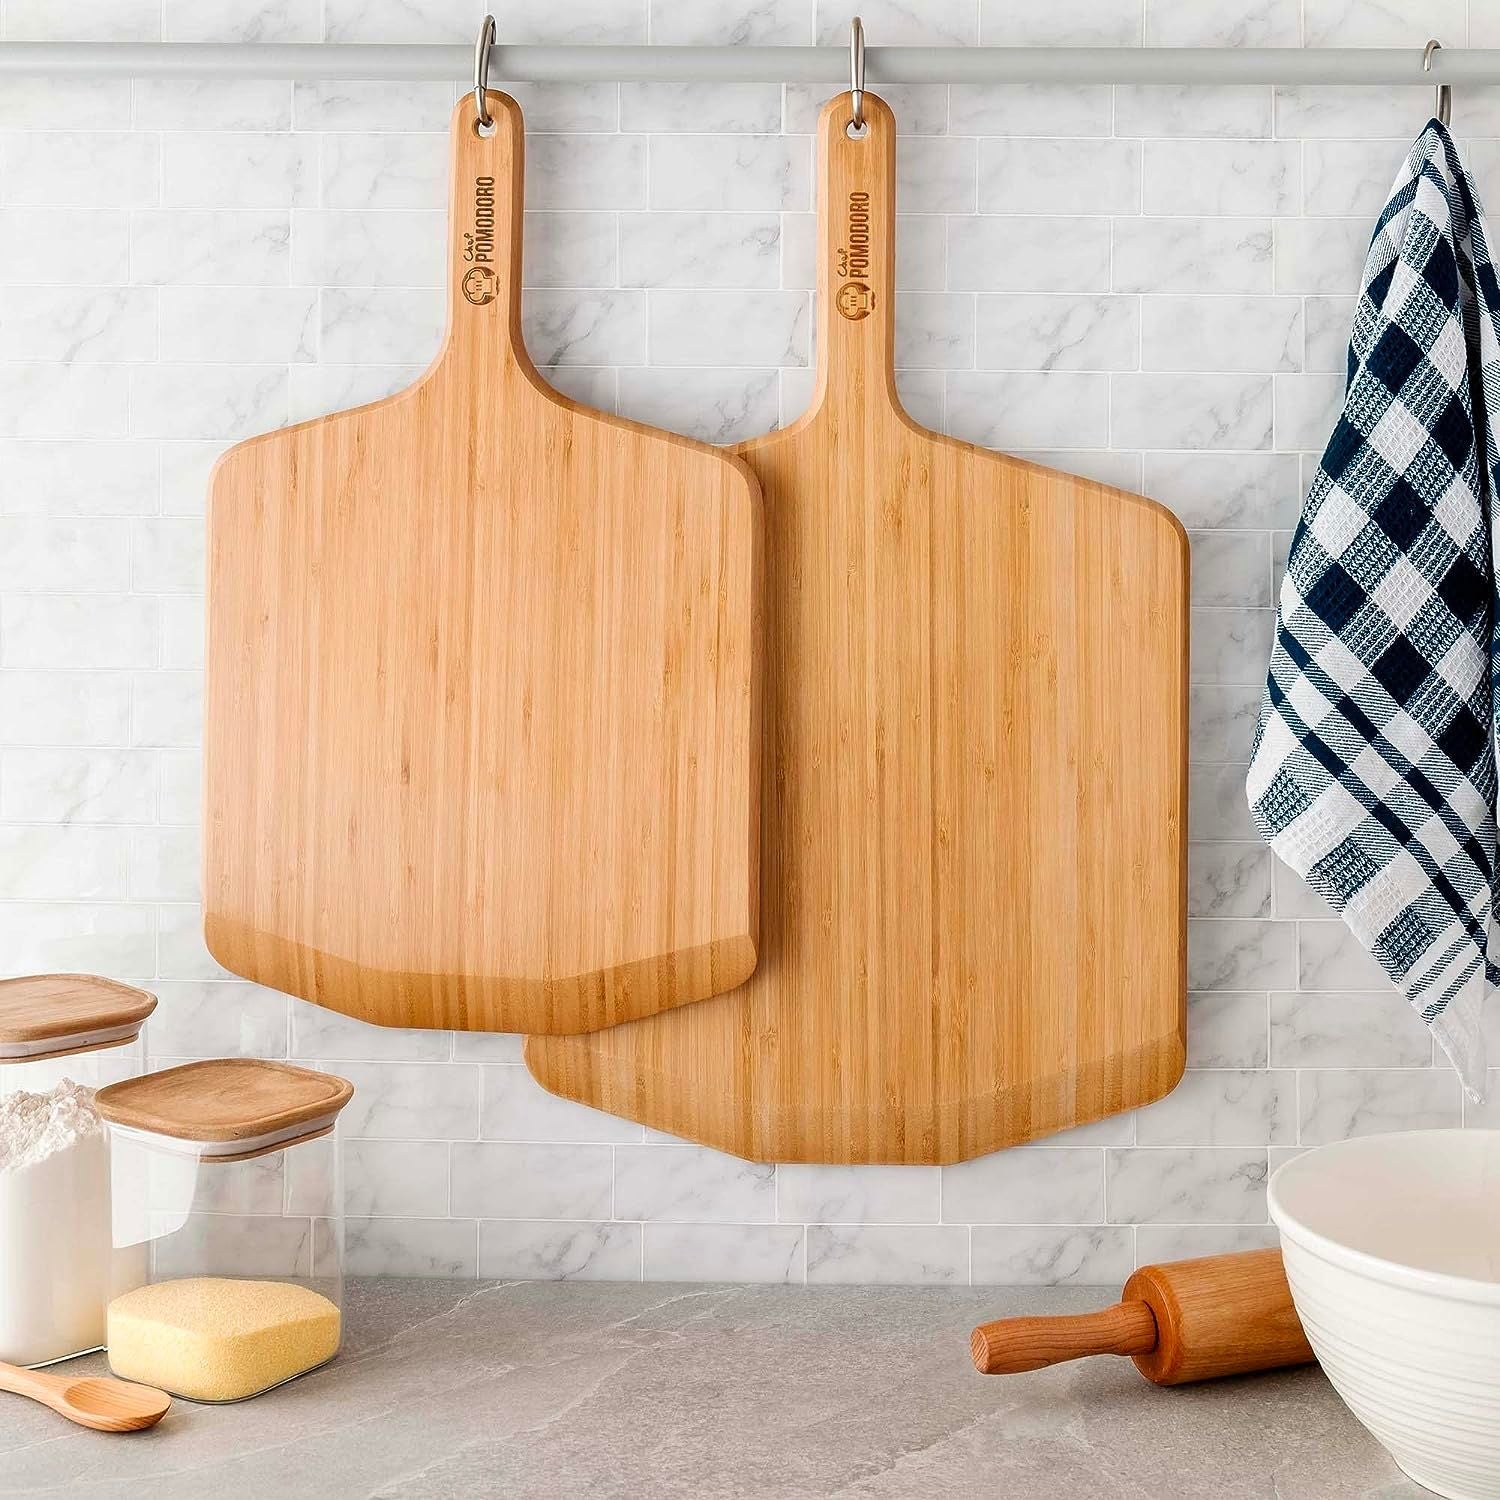 Zulay Kitchen Wooden Pizza Peel - Large 15 Pizza Paddle With Extra Long  Handles - Authentic Natural Bamboo Easy Glide Edges & Handle For Baking 